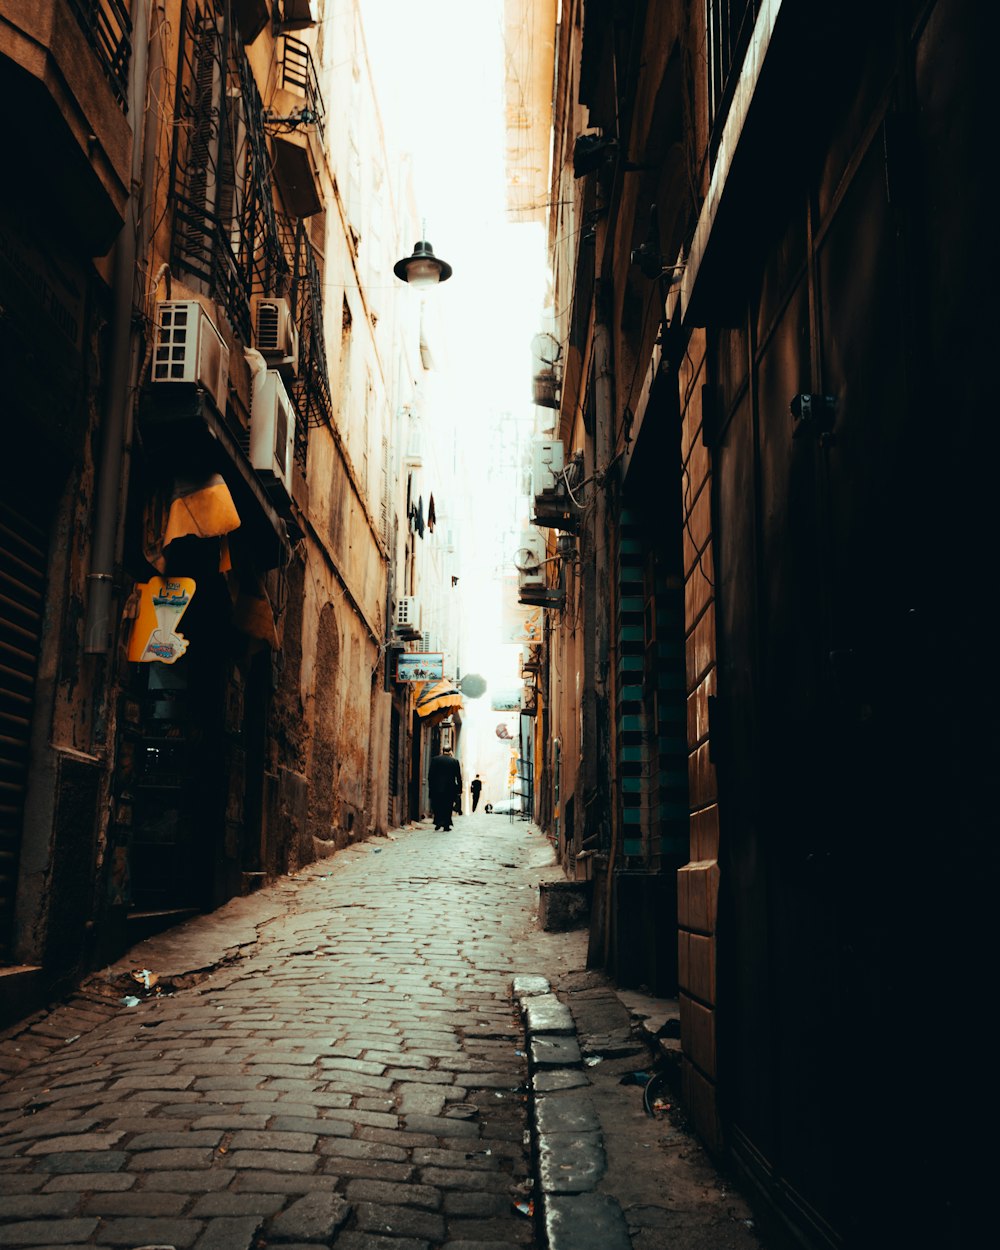 a narrow alleyway in a city with people walking down it